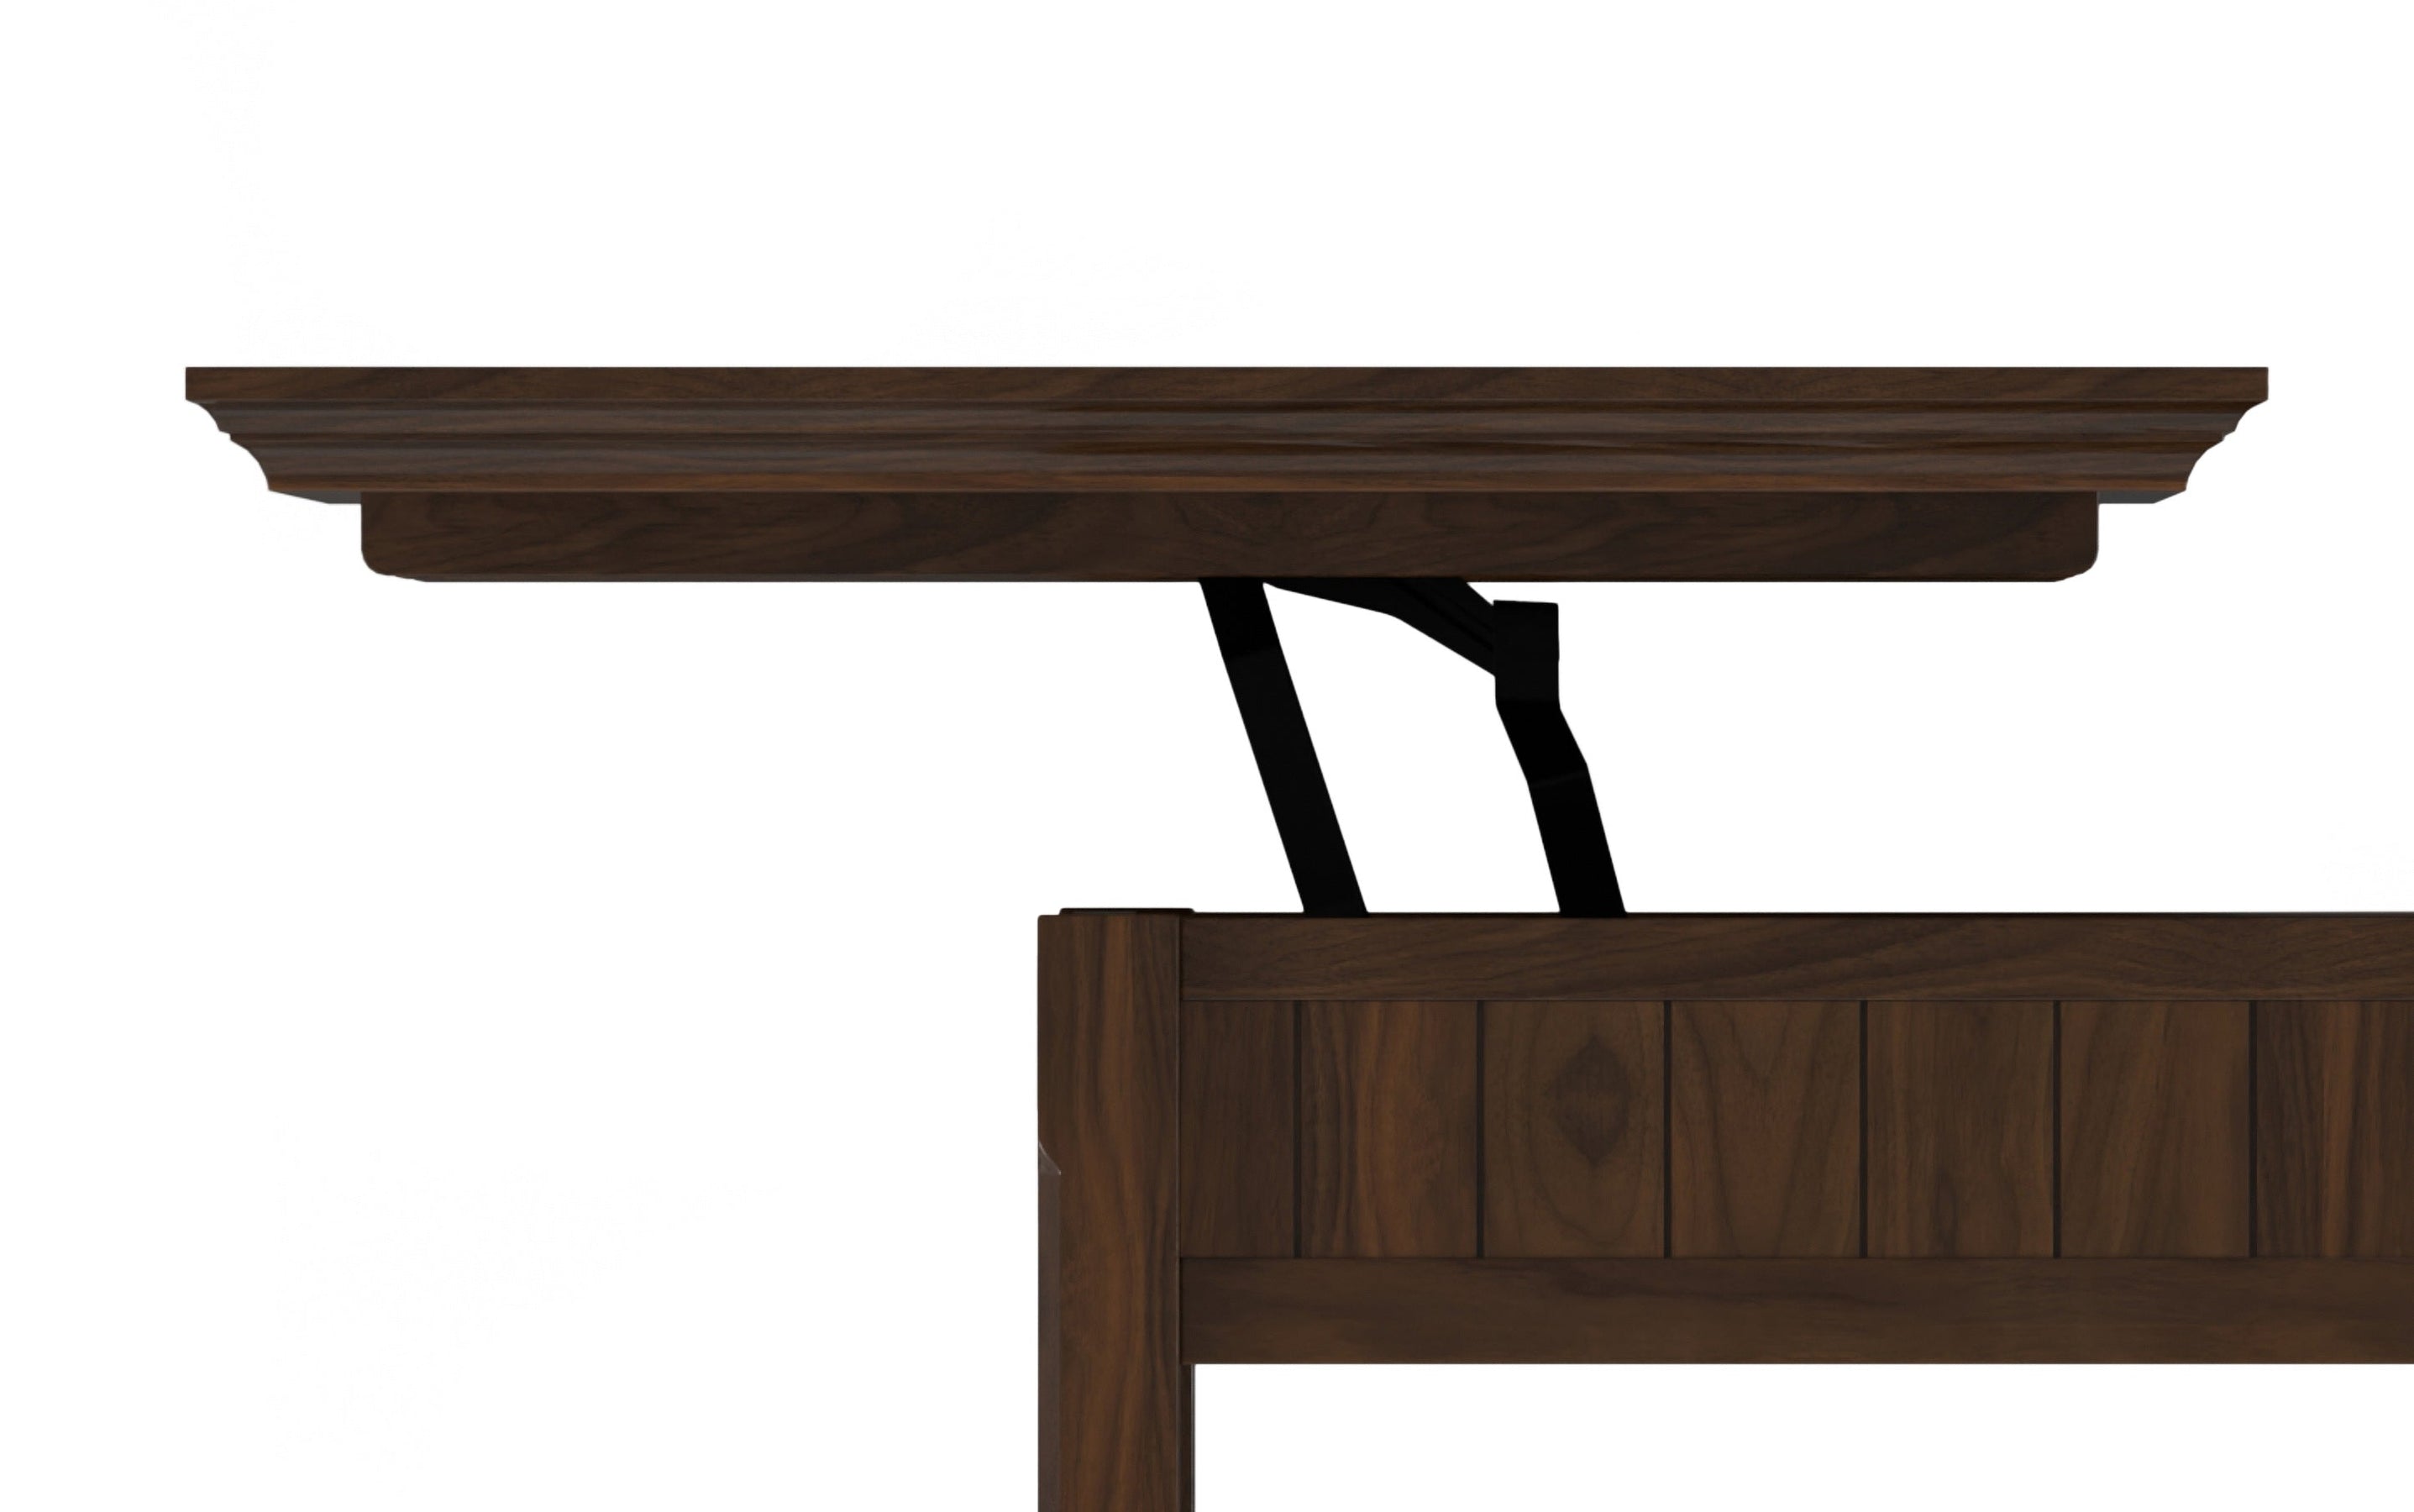 Acadian Lift Top Coffee Table